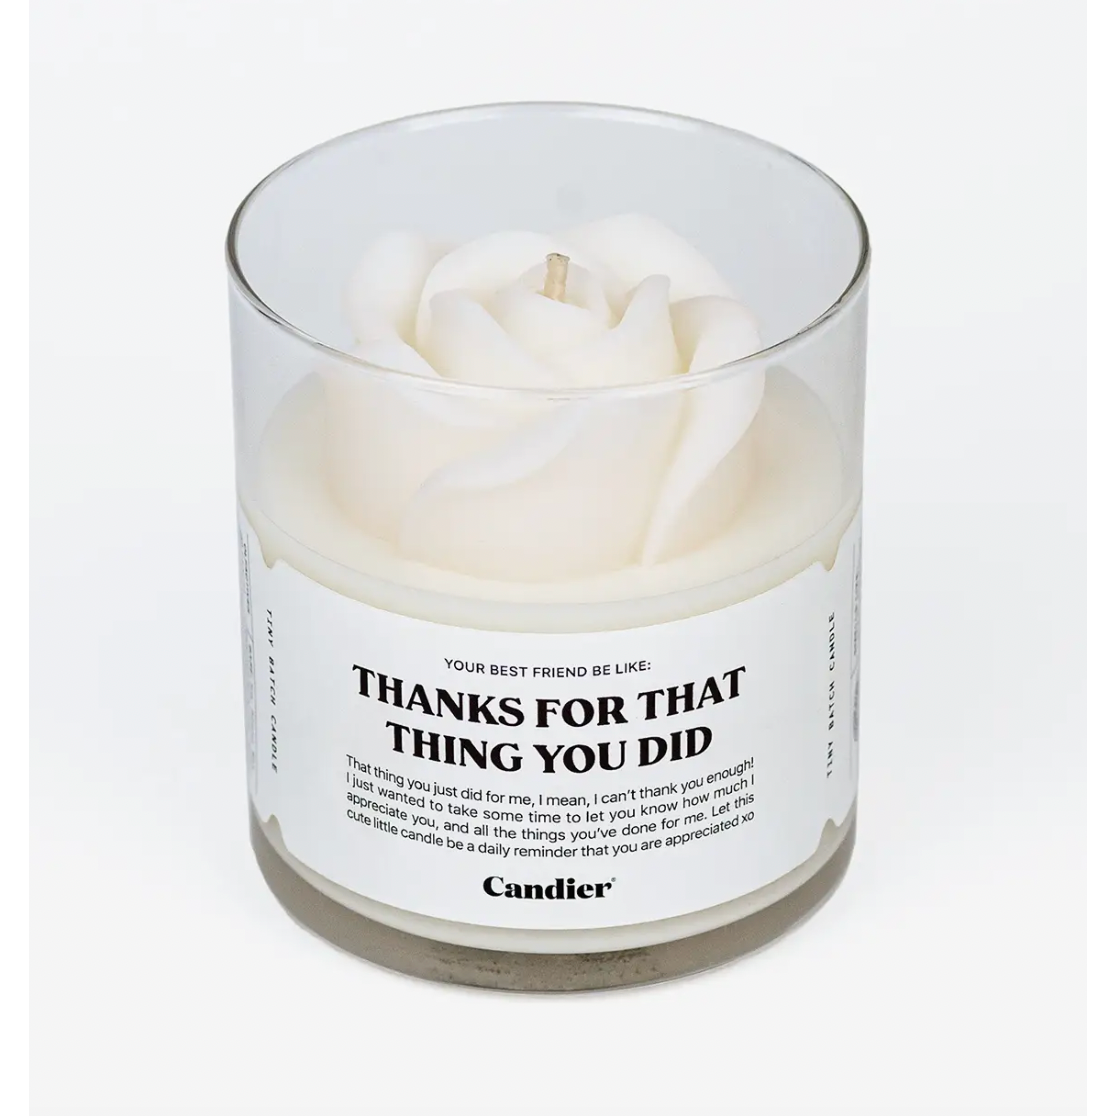 Thank You Candle